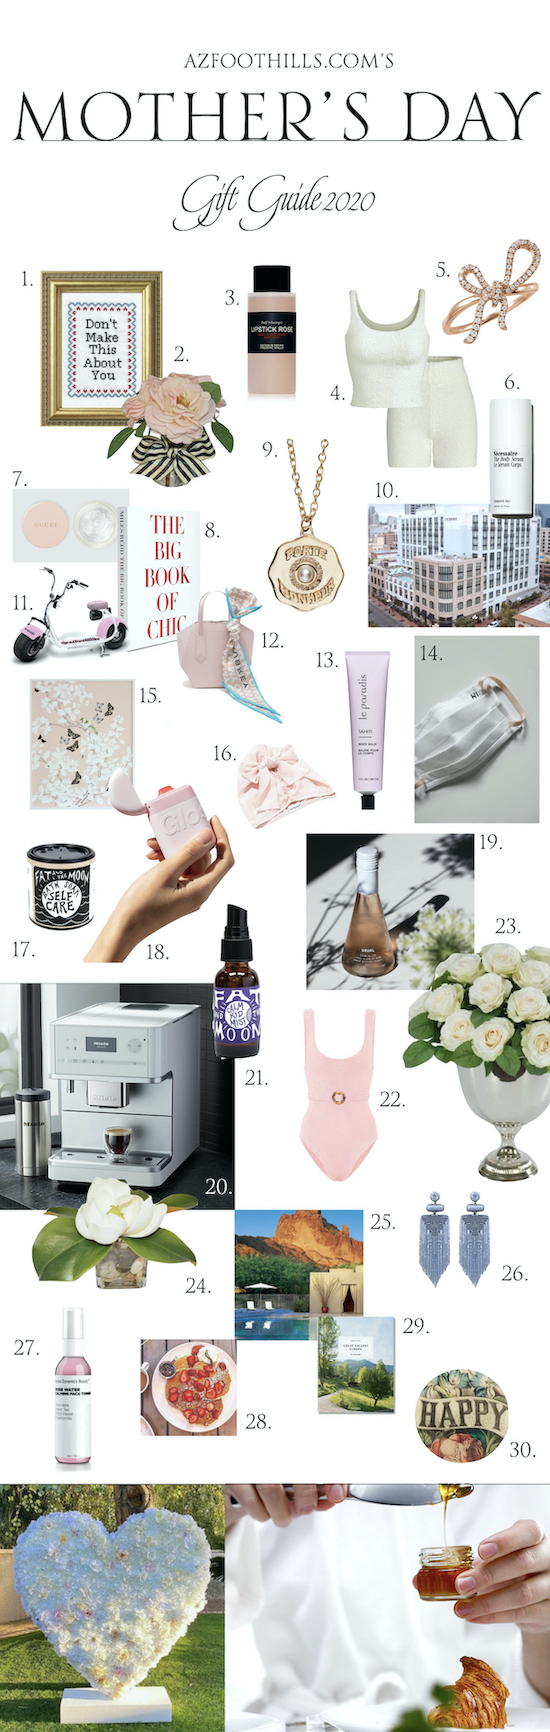 Mothers Day Gift Guide.001.jpeg.001 copy